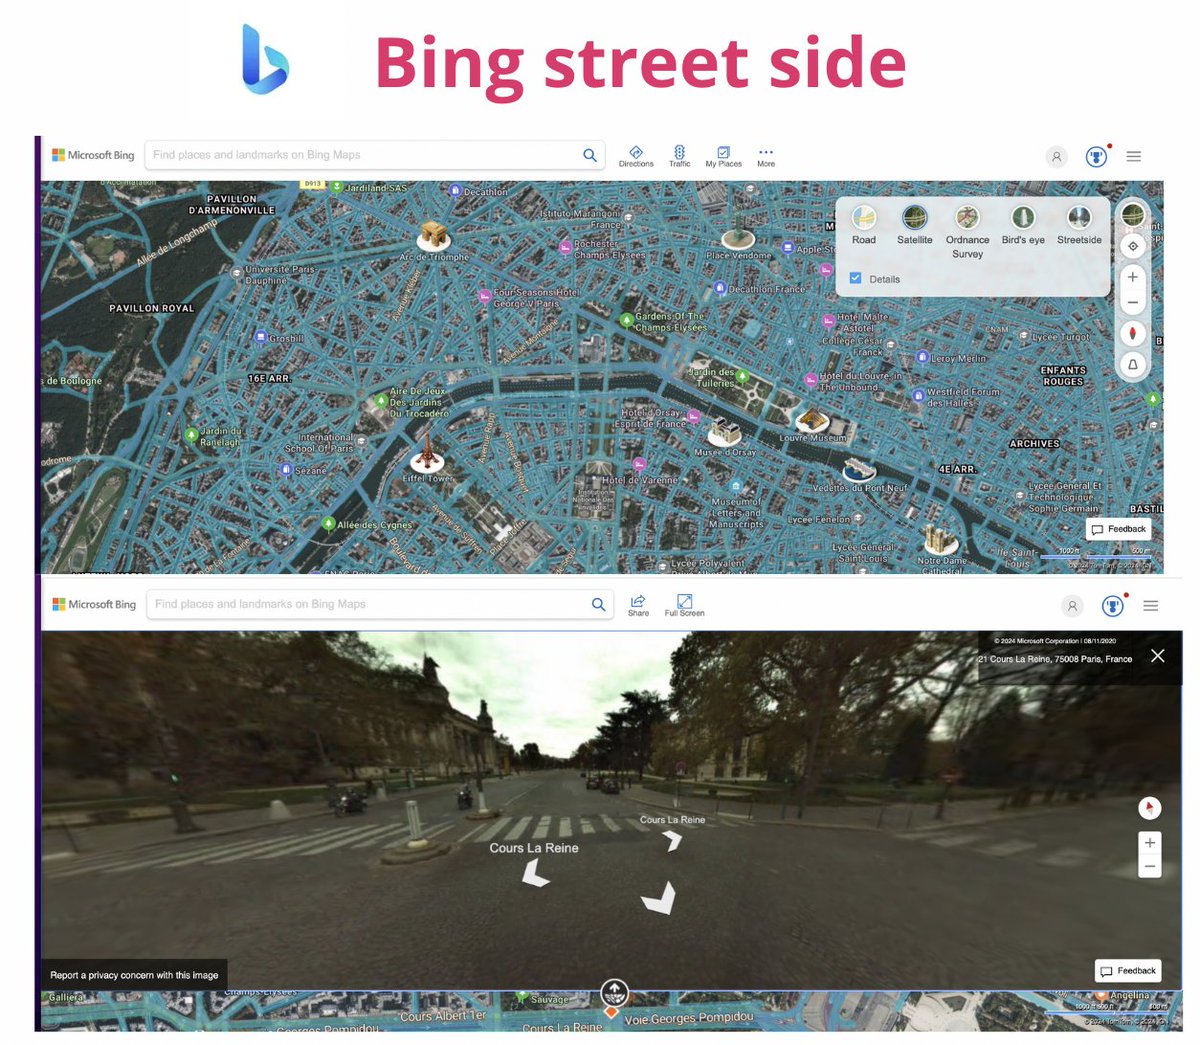 If no suitable panoramas were found for your photo location on Google Street View, try searching for the same location on Bing Street Side. The service has a large coverage area in the US and Europe.

#osint #geoint